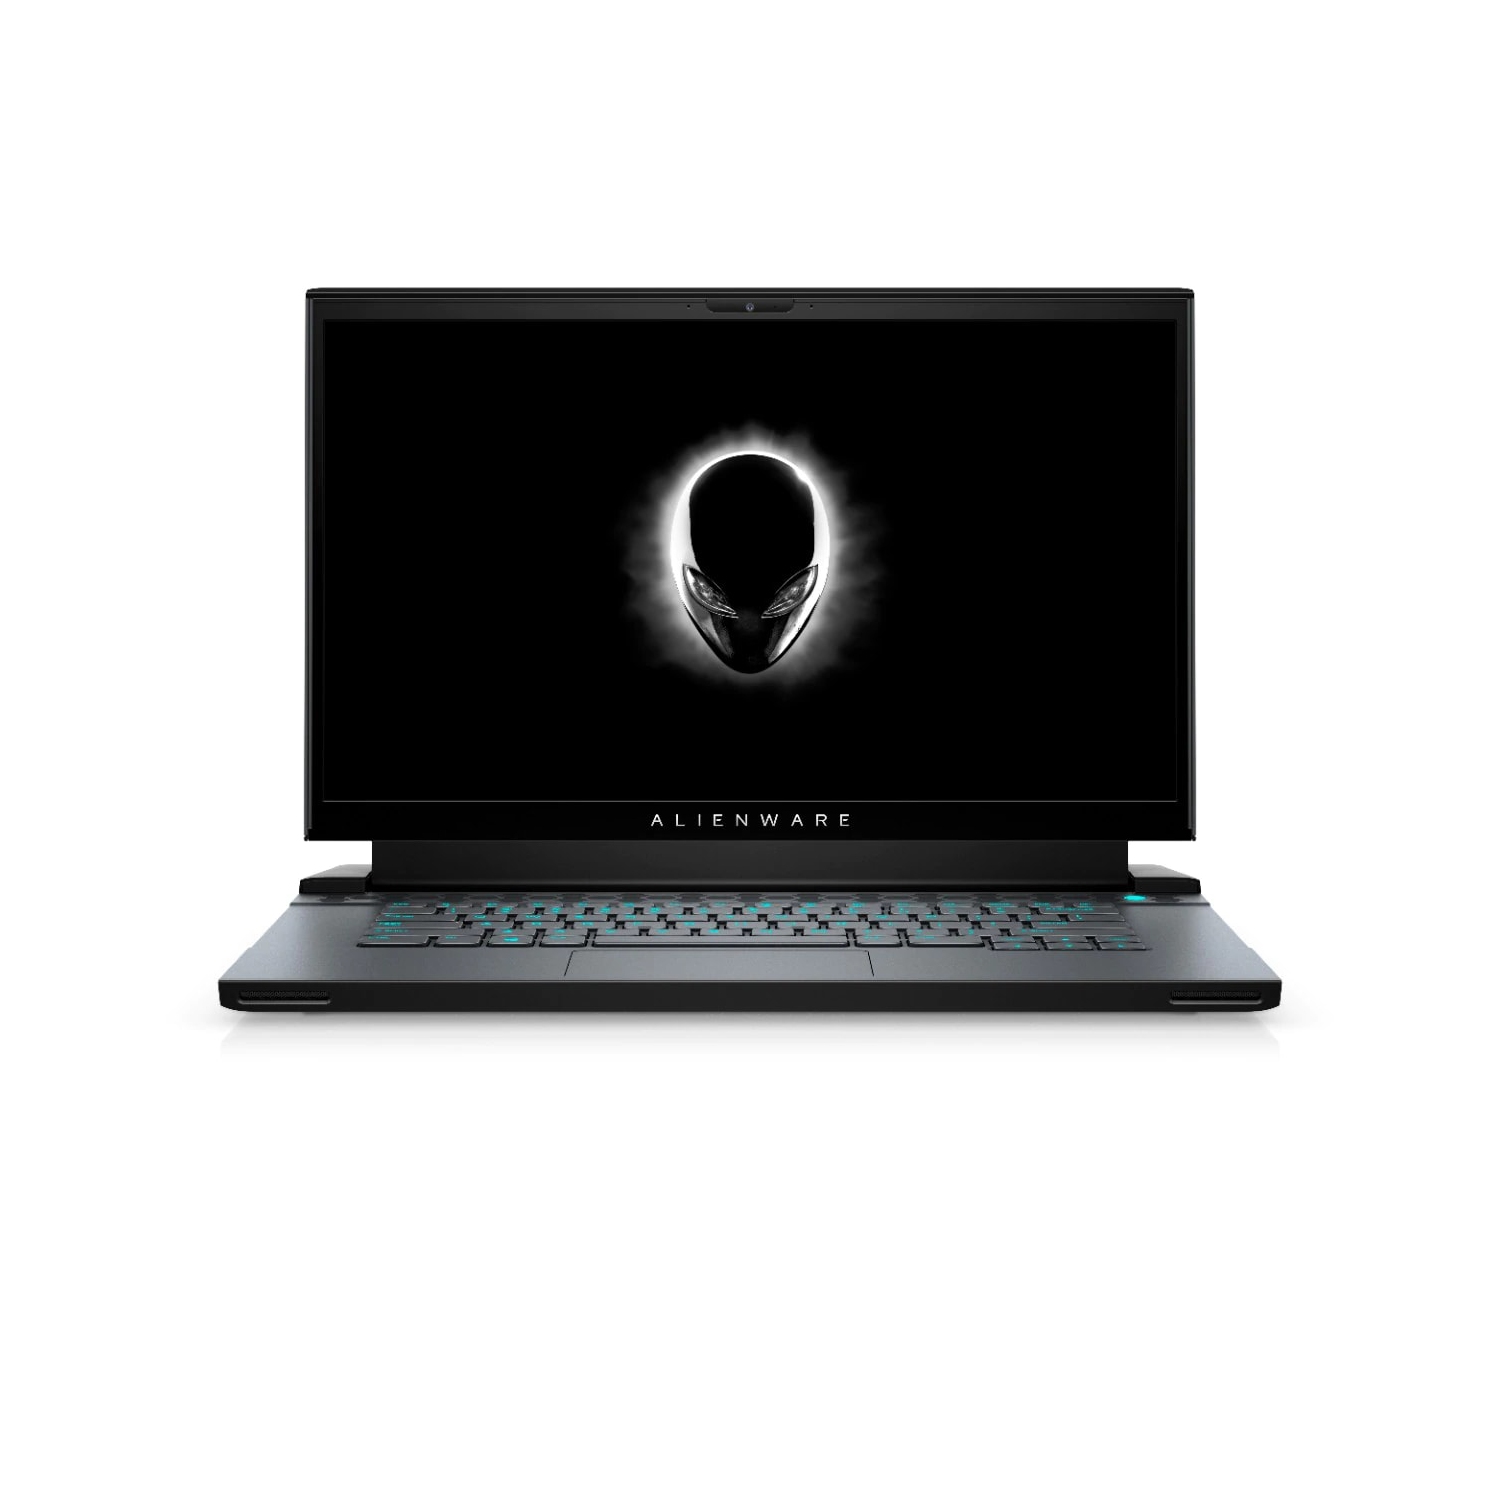 Refurbished (Excellent) - Dell Alienware m15 R4 Gaming Laptop (2021), 15.6" FHD, Core i7, 1TB SSD + 1TB SSD, 32GB RAM, RTX 3070, 5 GHz, 10th Gen CPU Certified Refurbished